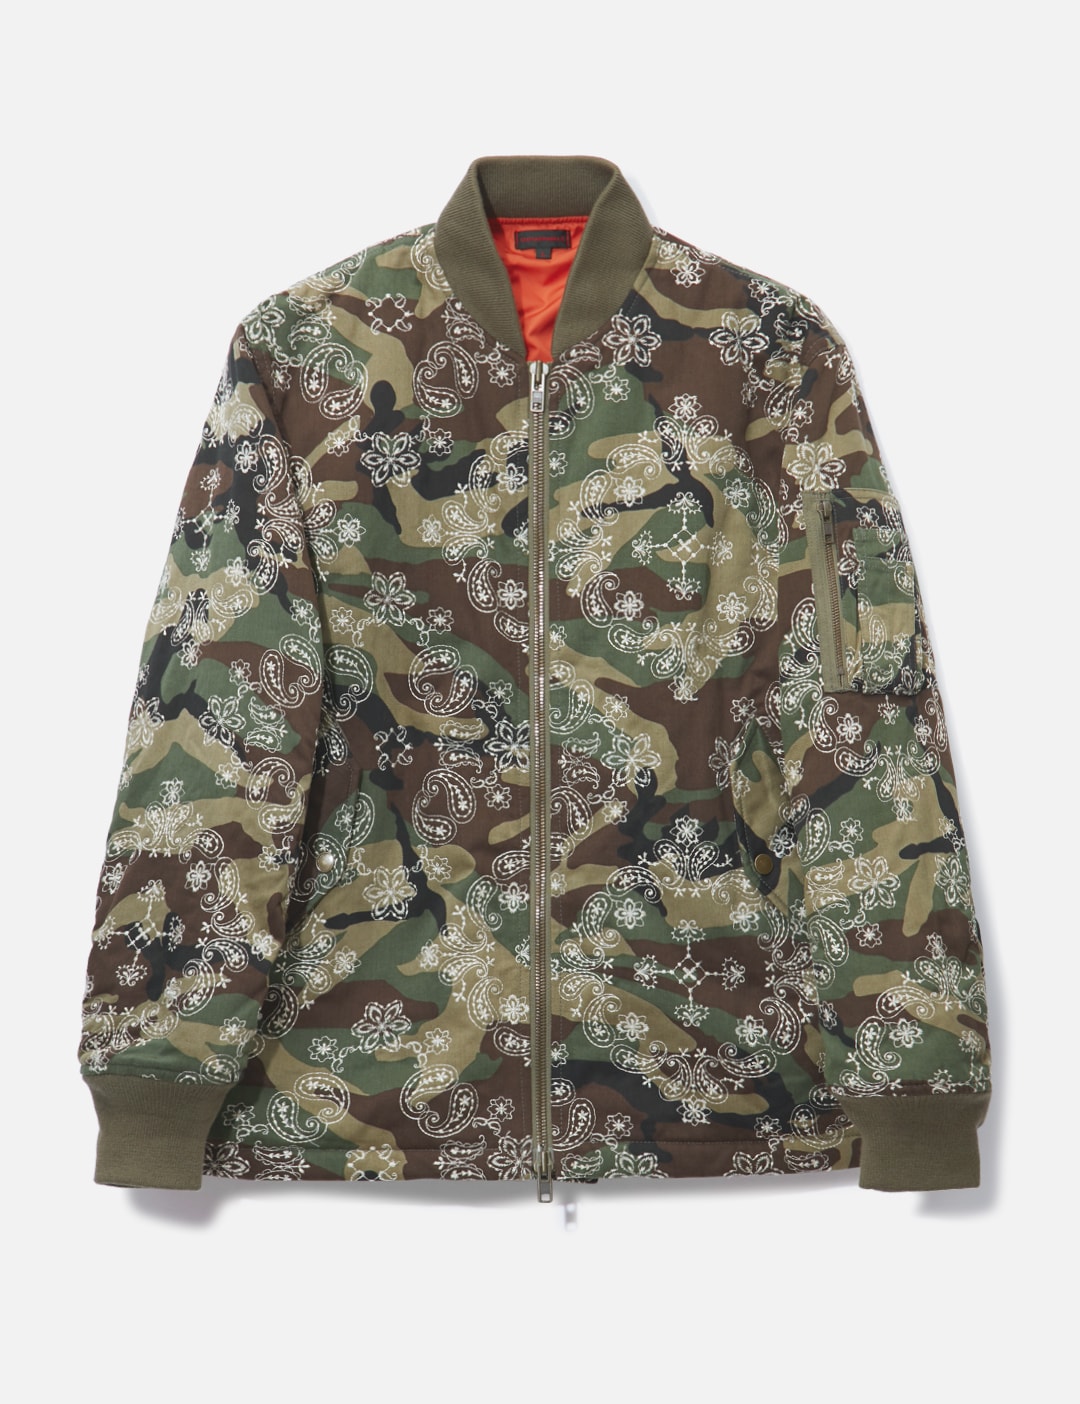 Clot - Clot Camouflage MA1 Bomber Jacket | HBX - Globally Curated ...